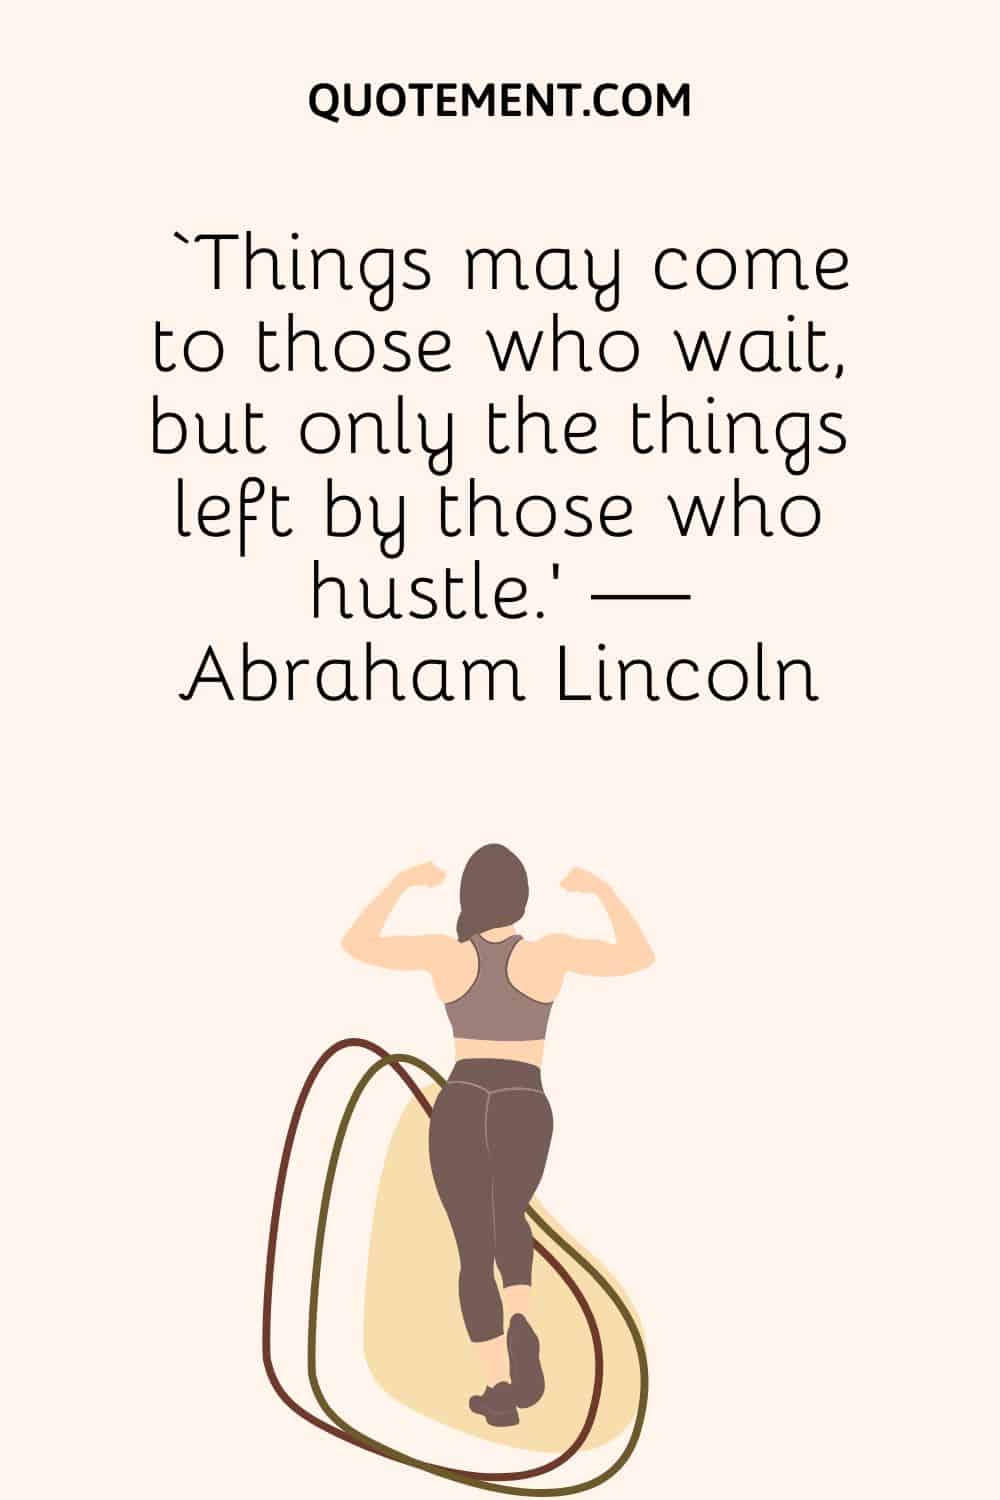 ‘Things may come to those who wait, but only the things left by those who hustle.’ — Abraham Lincoln